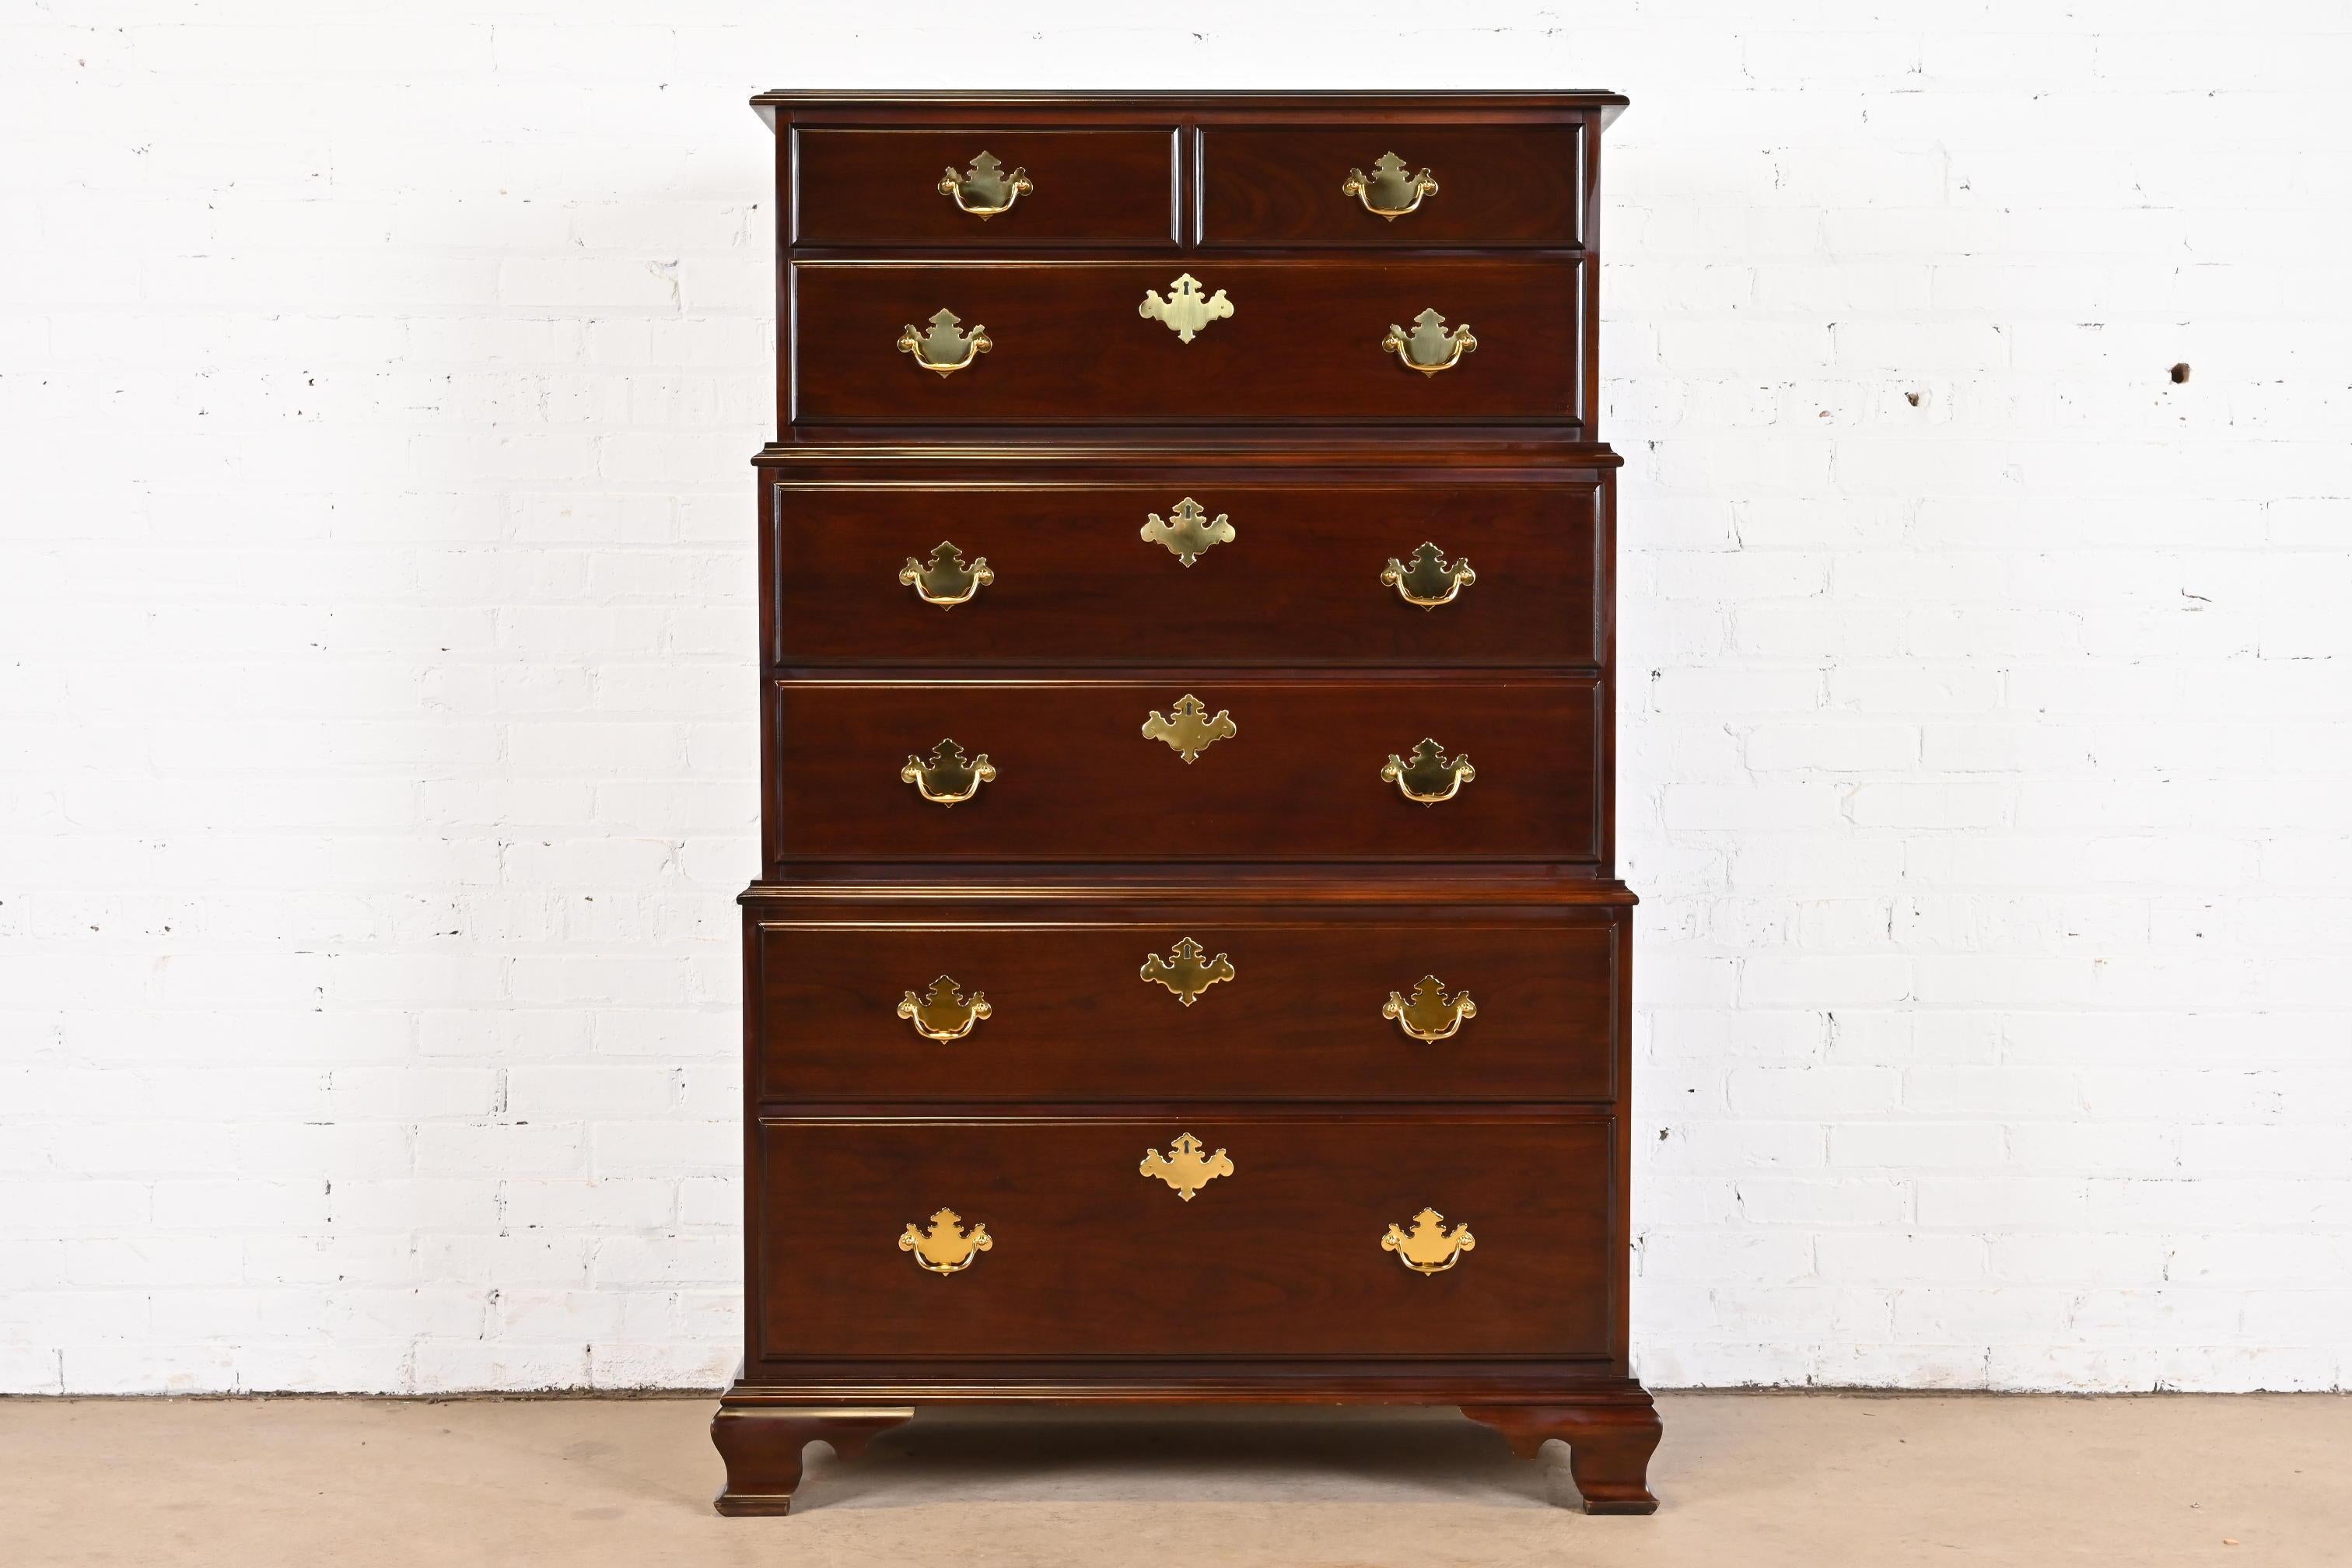 An exceptional Georgian or Chippendale style triple chest-on-chest seven-drawer highboy dresser

By Harden Furniture

USA, Late 20th century

Solid mahogany, with original brass hardware.

Measures: 39.25